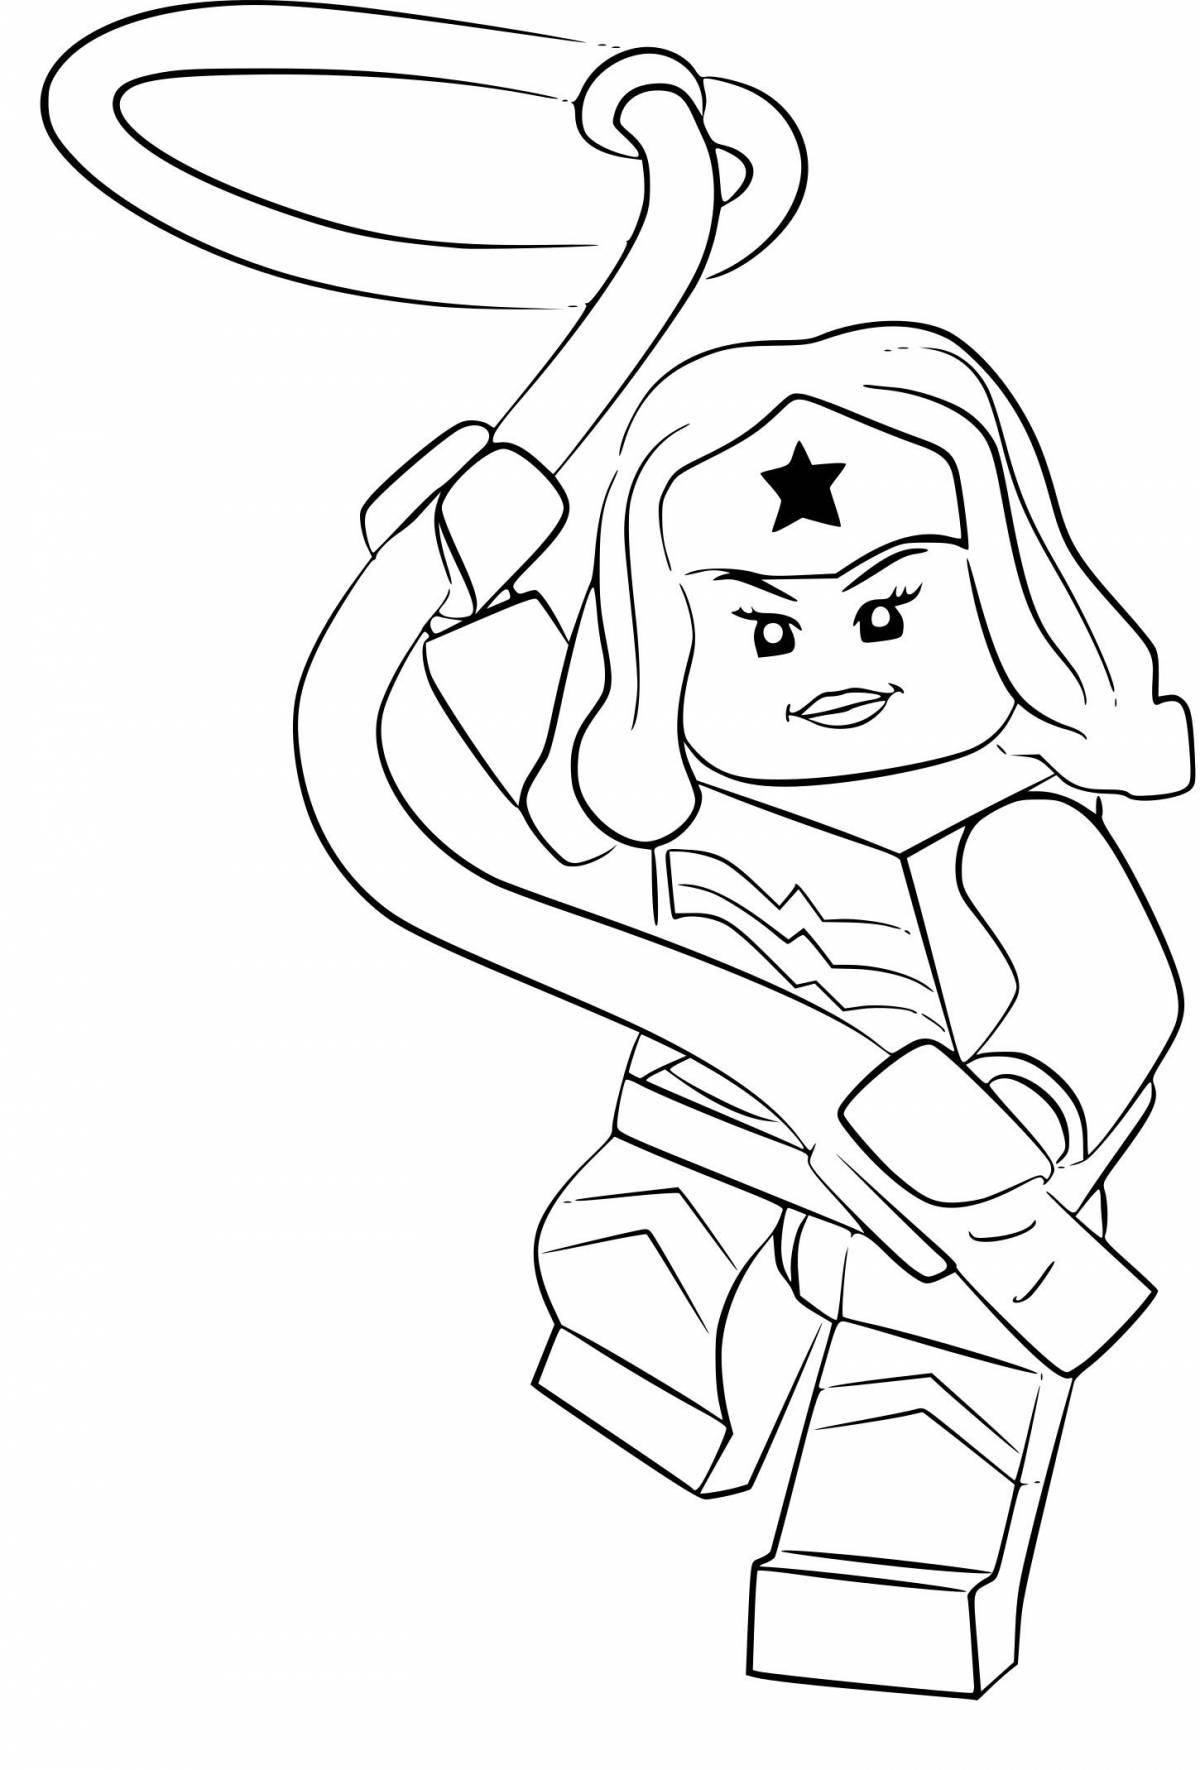 Great lego movie 2 coloring pages